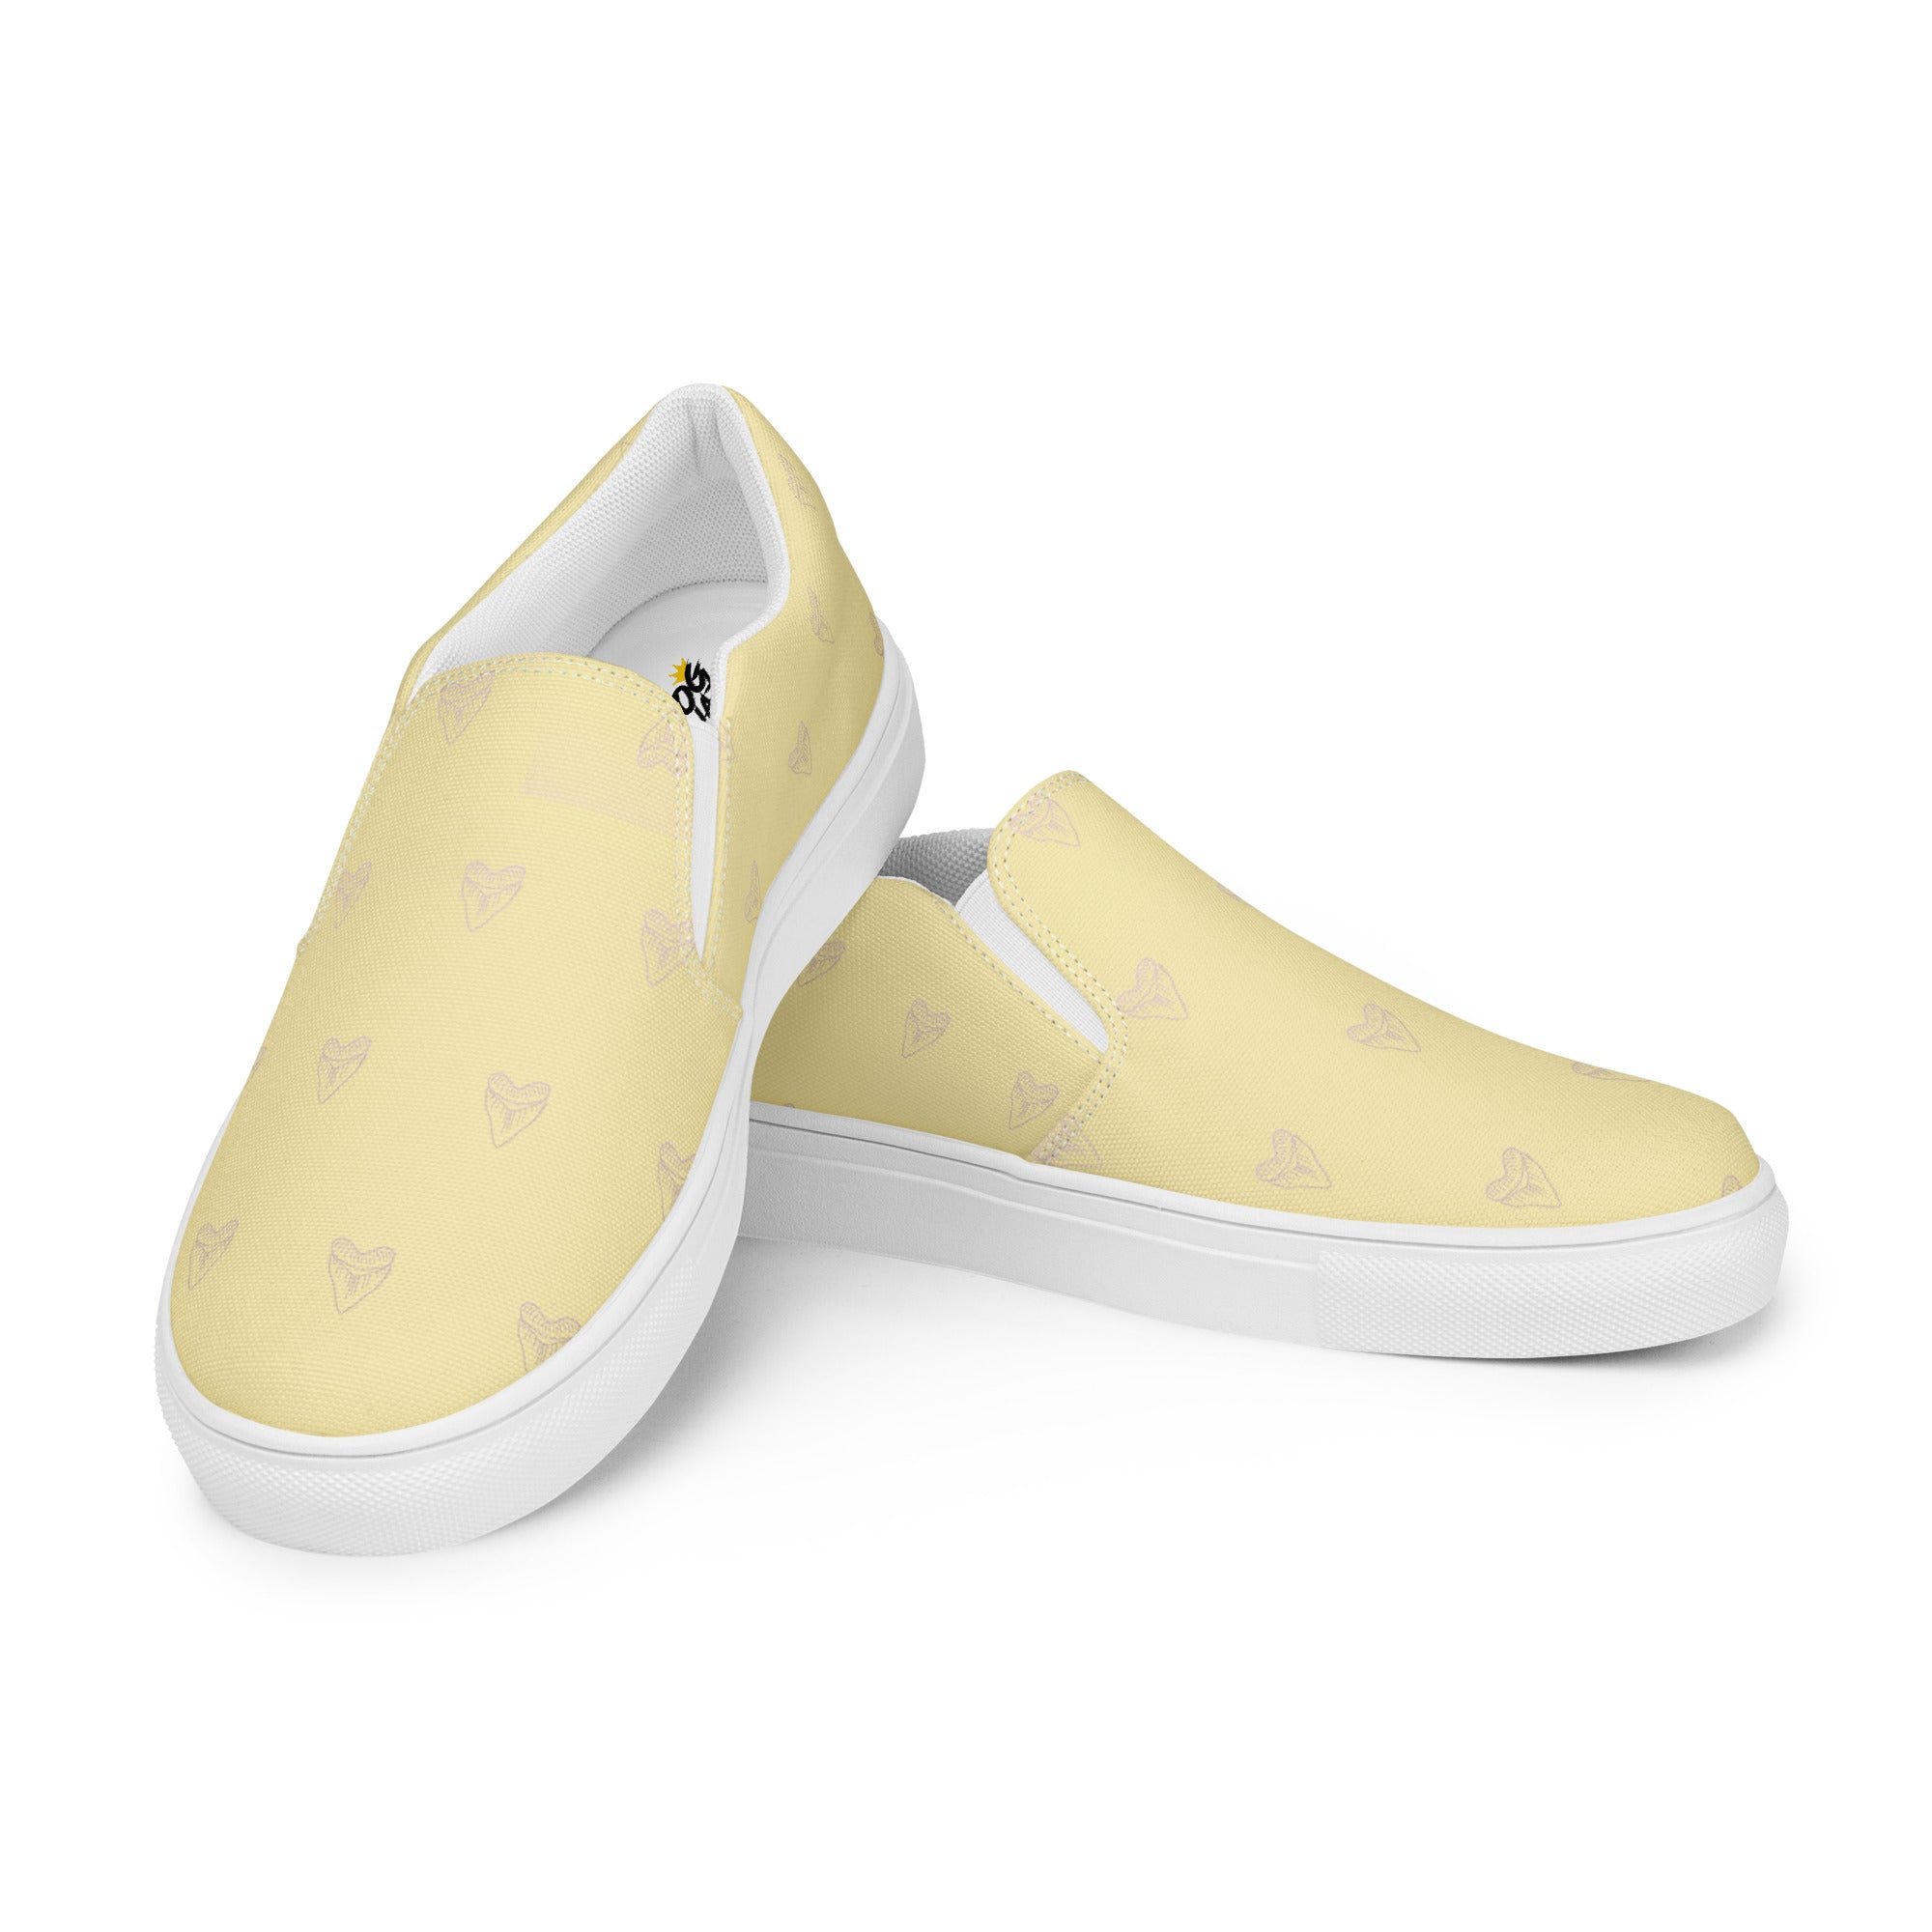 Soft Yellow & Pink Women’s slip-on shoes